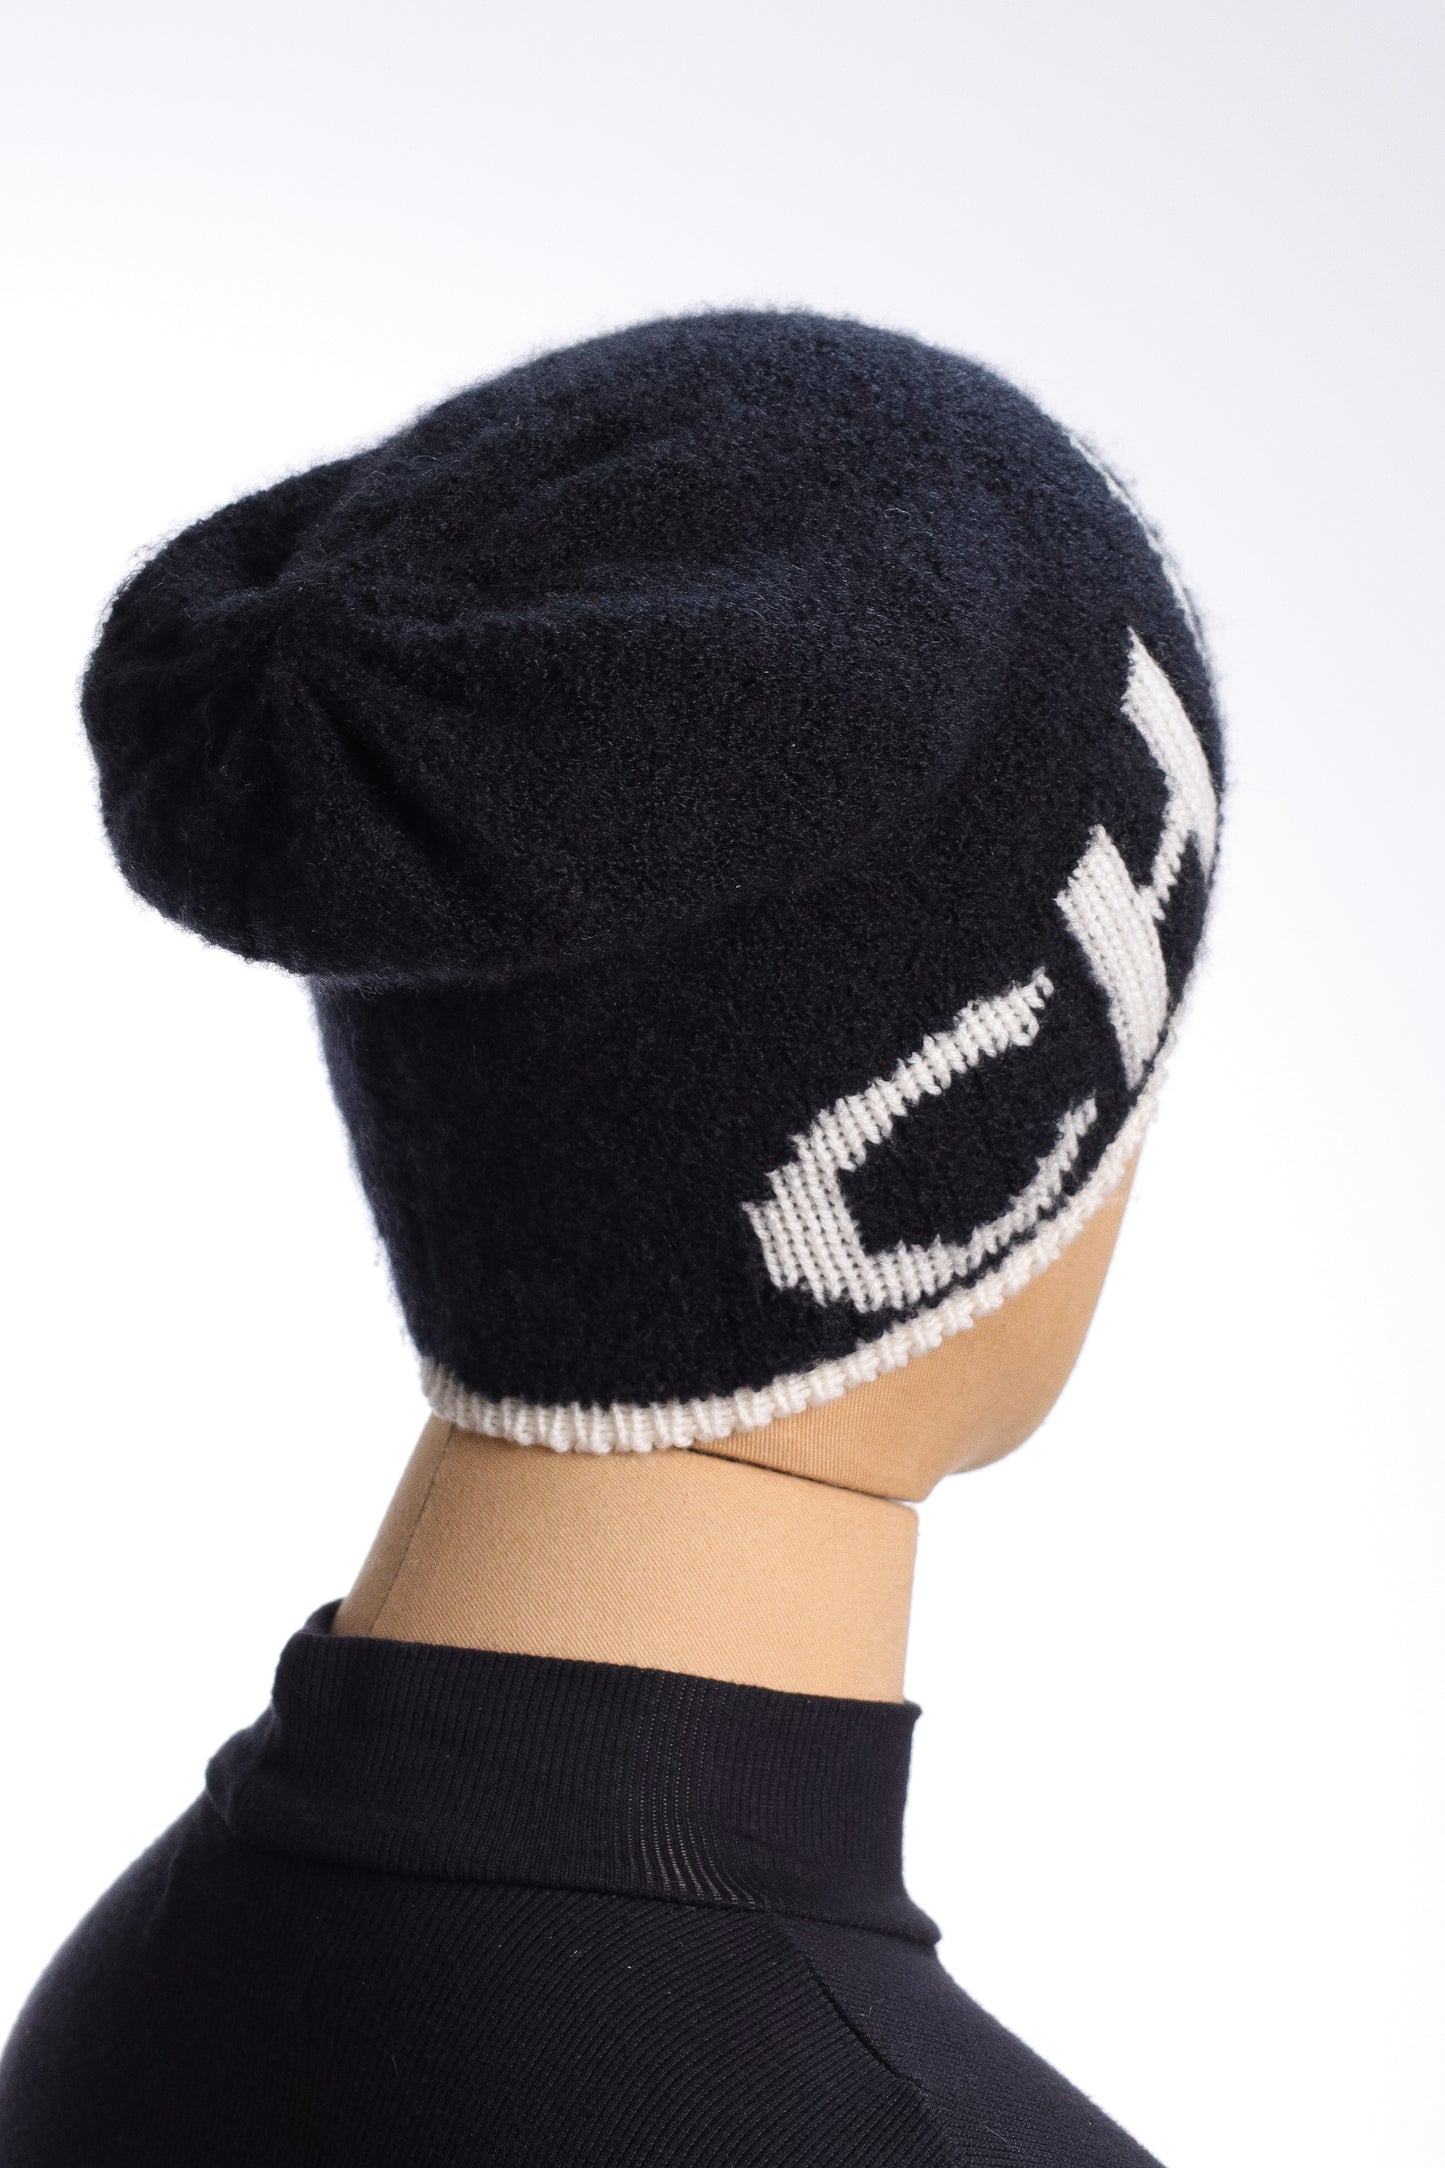 CHANEL hat CC collection 2021 - NEW - AA7767 B06531 Cashmere wool